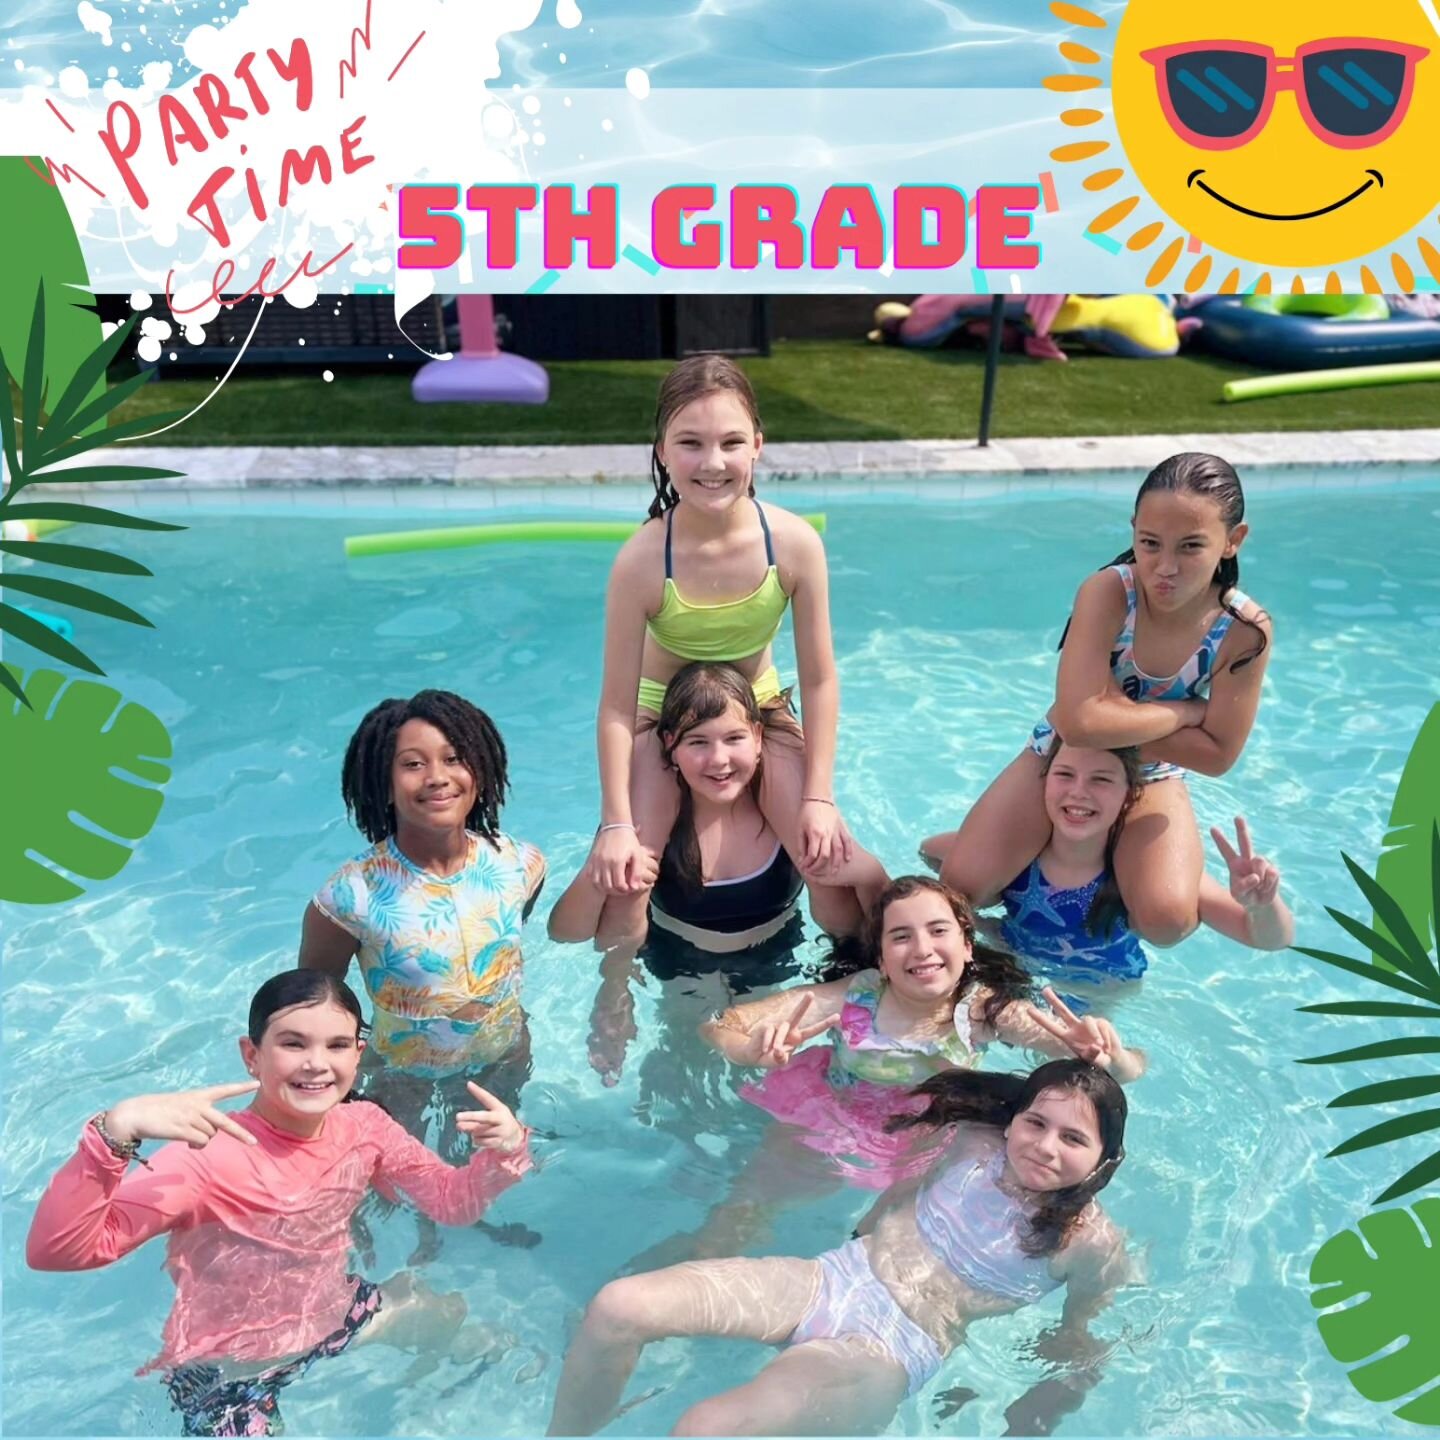 🌸 5th grade girls pool party celebrating 🎊 another great school year! Thank you 🙌Ferrarese family for hosting another Eagle Evening Social.